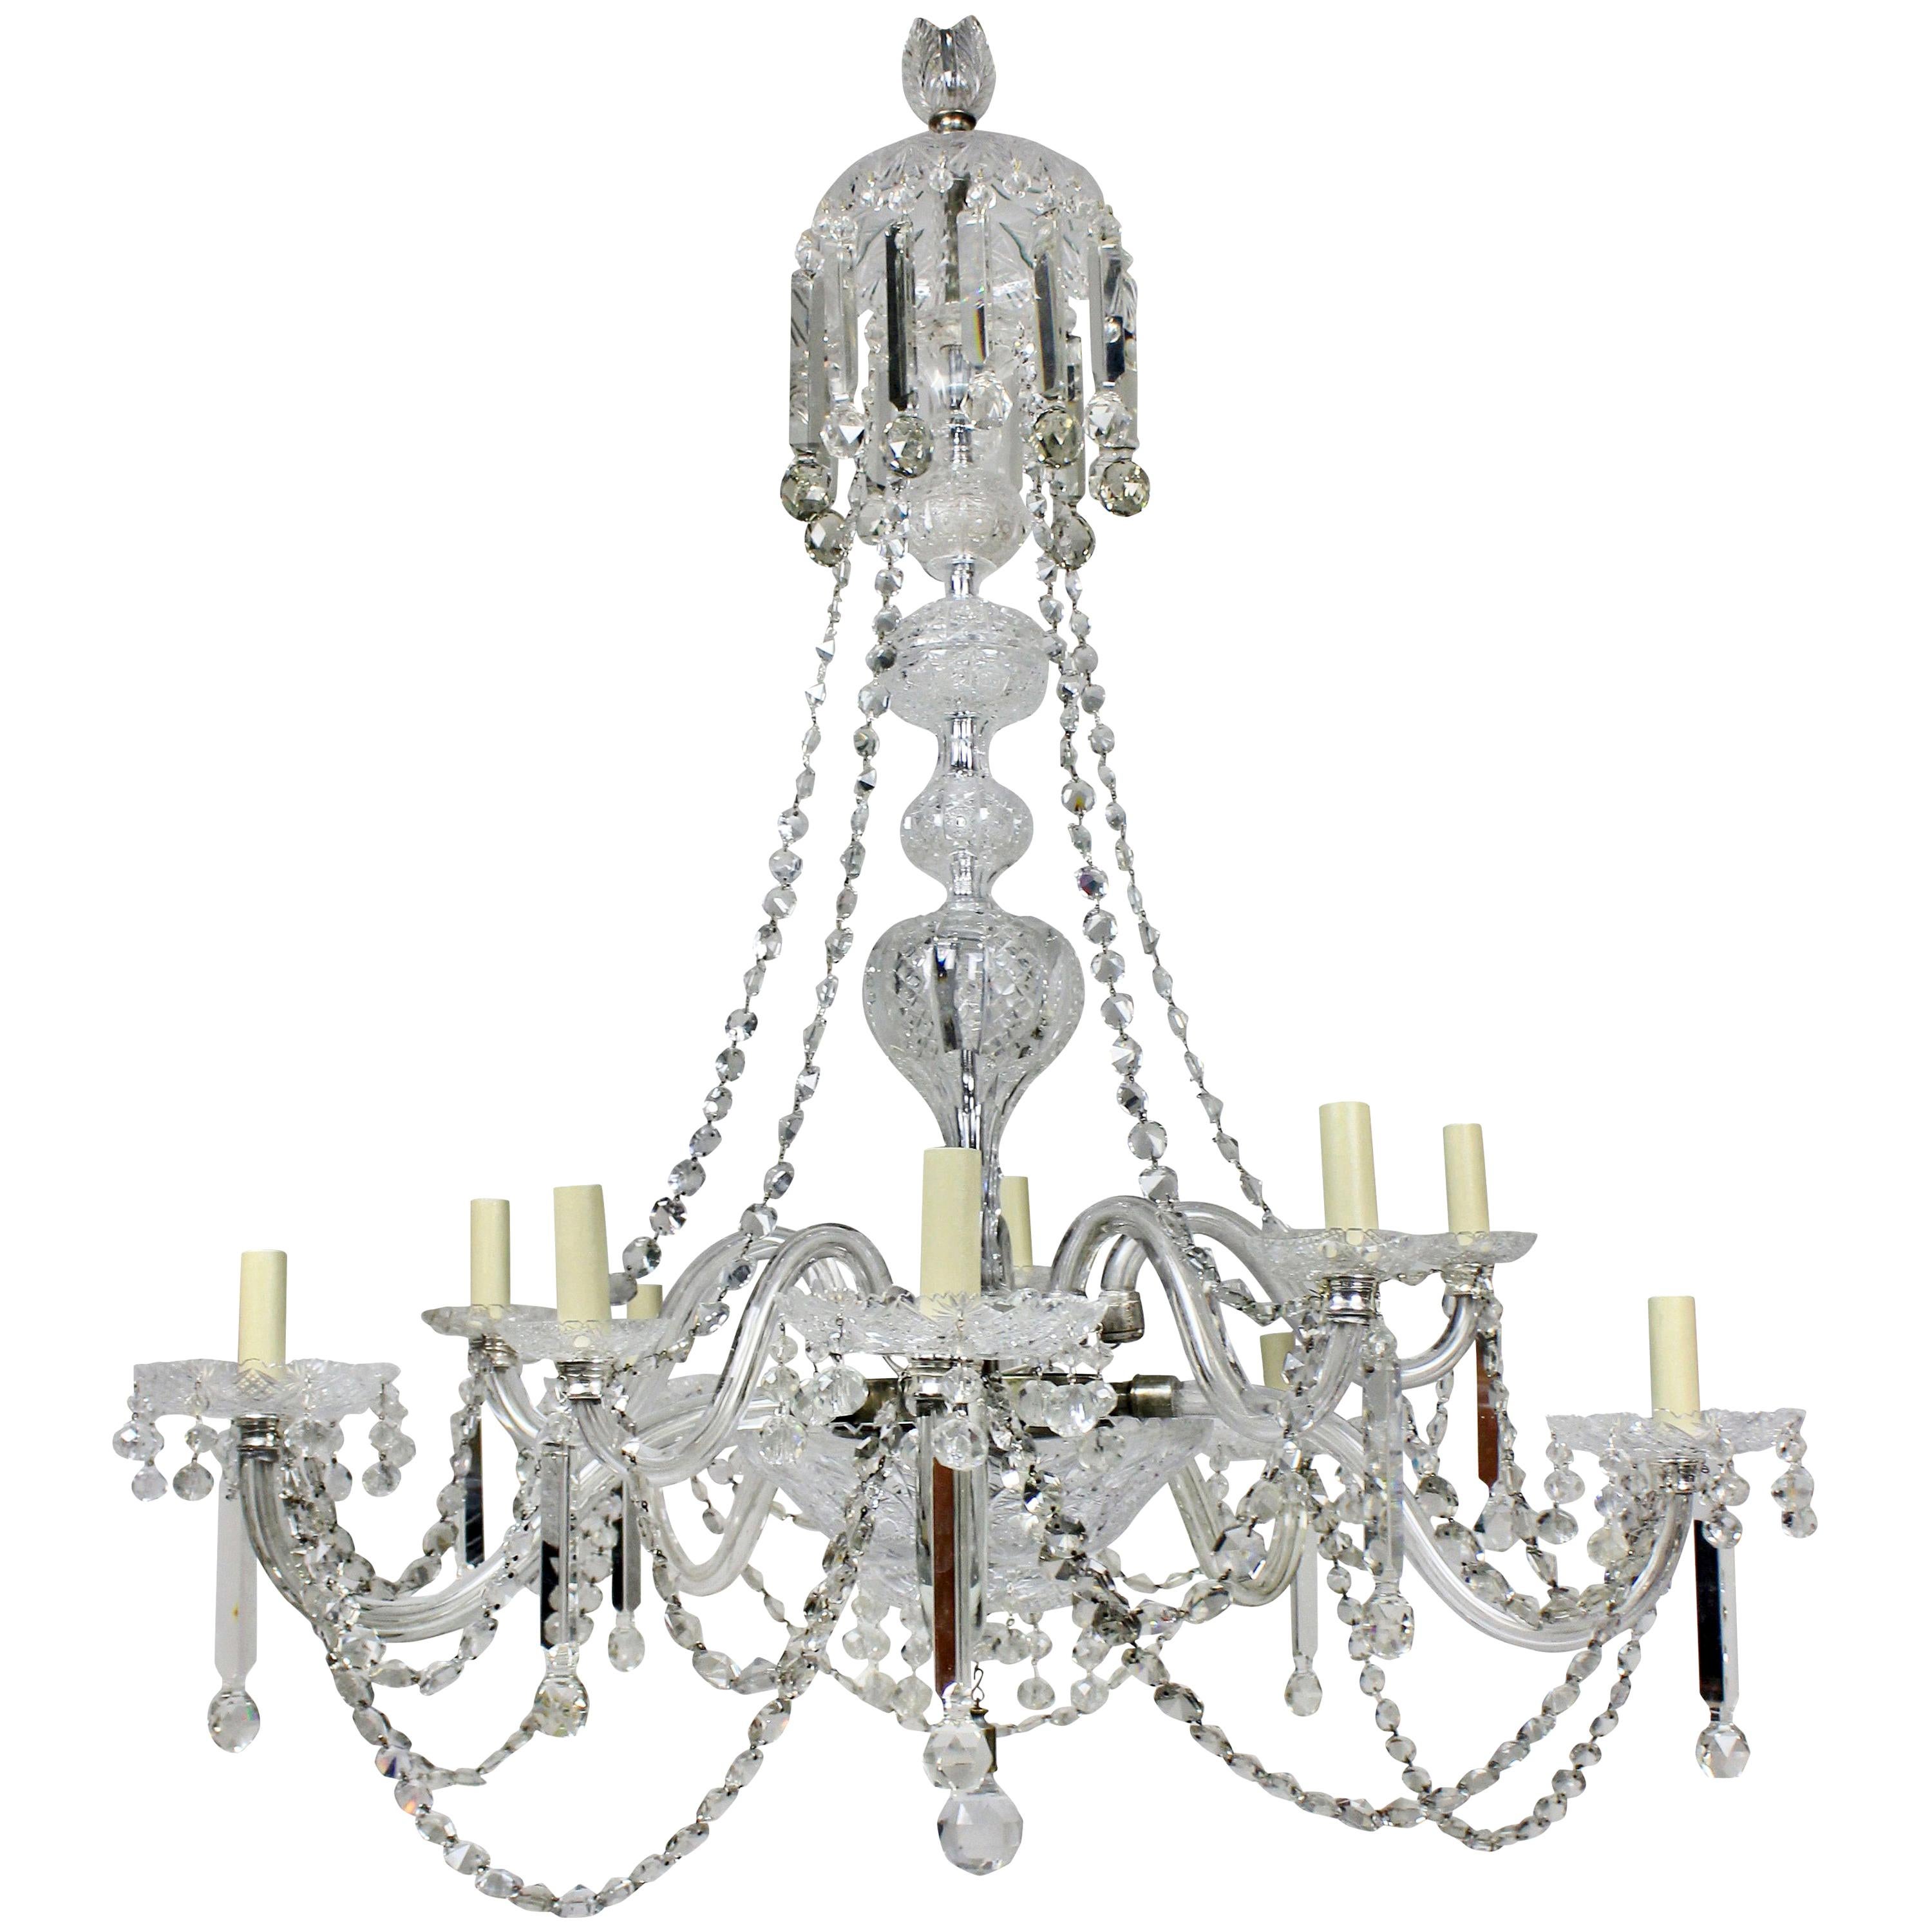 Large 19th Century English Cut-Glass Chandelier of Good Quality